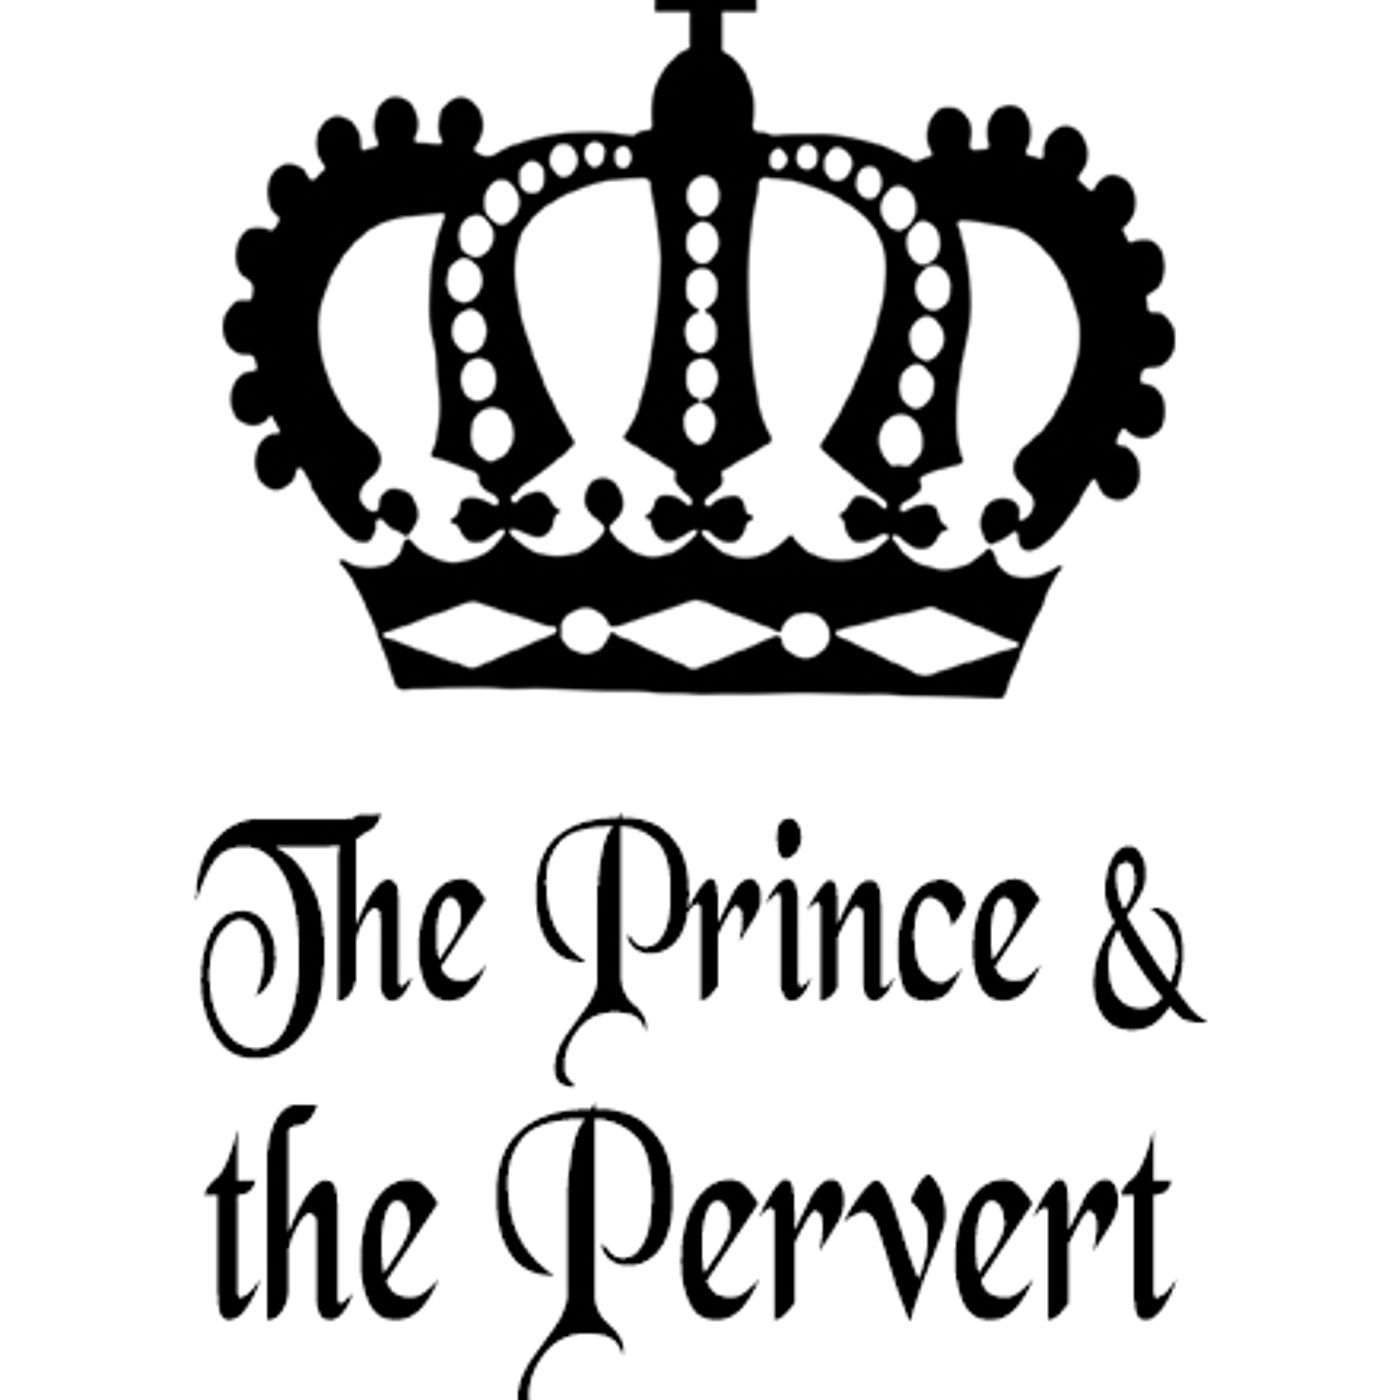 Jeffrey Epstein, The Prince and the Pervert